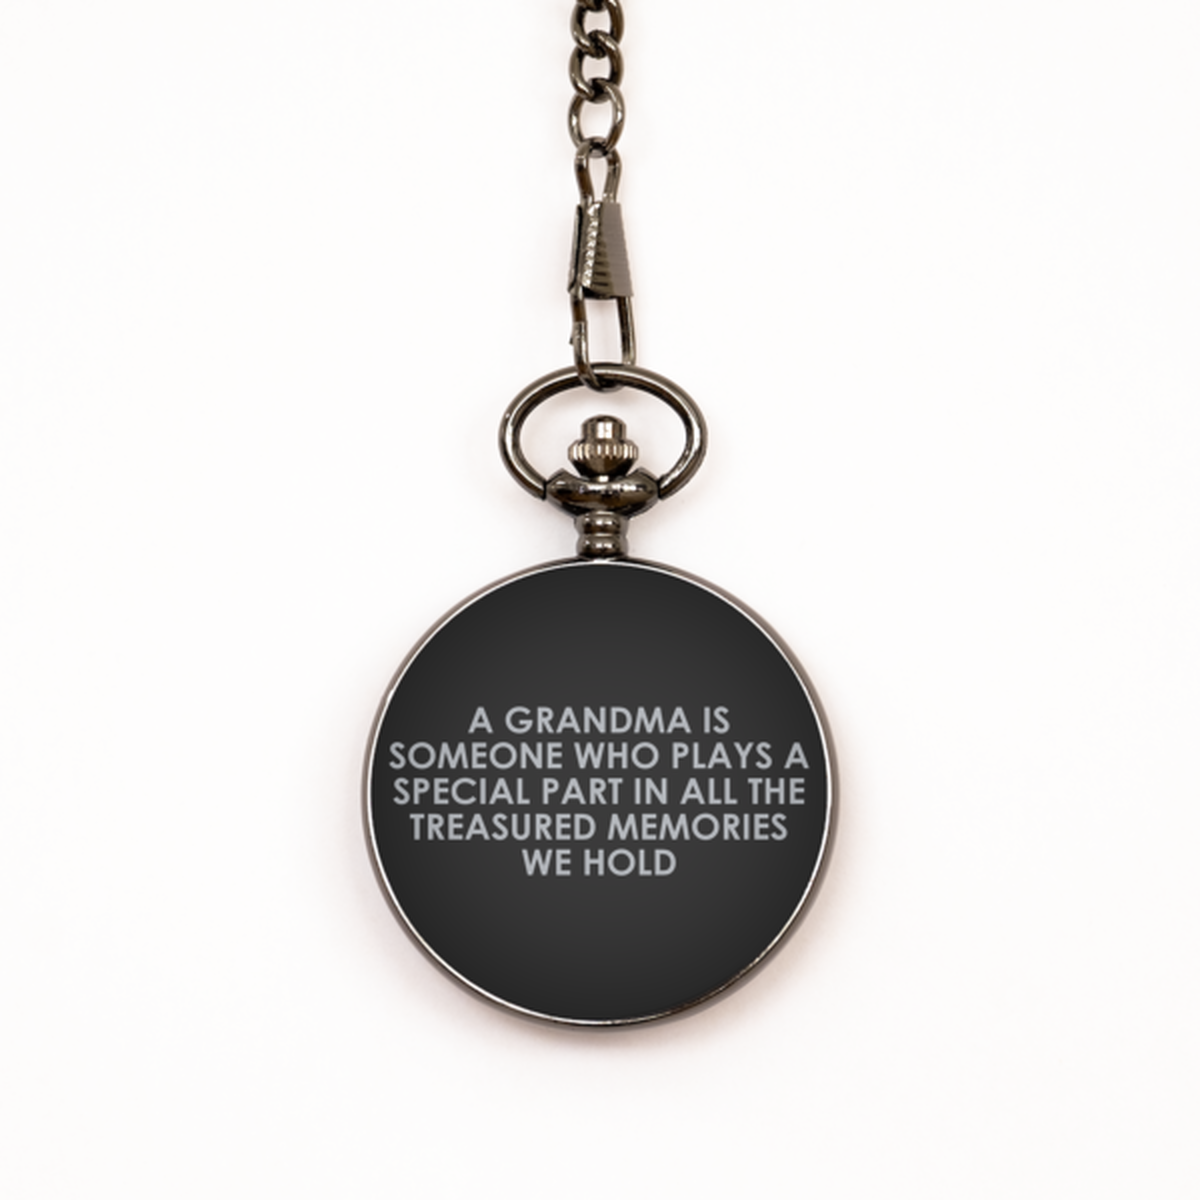 To My Grandma  Black Pocket Watch, Treasured Memories, Valentines Gifts For Grandma From Granddaughter, Birthday Gifts For Women